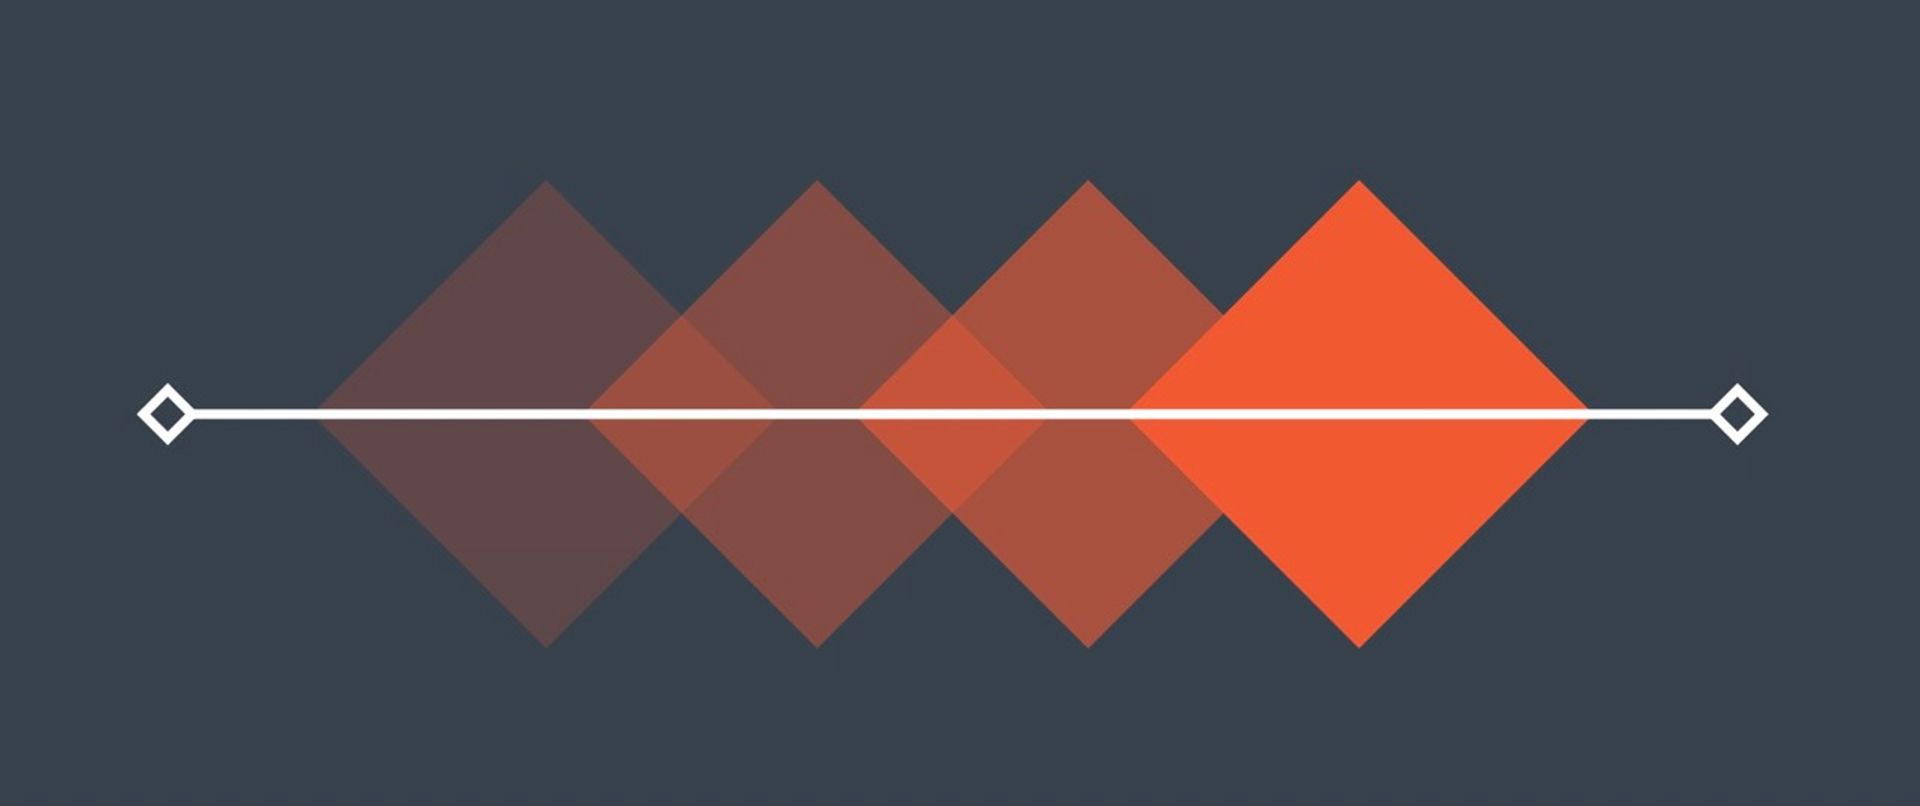 Four orange diamond shapes along a white line increasing in opacity to represent web animations